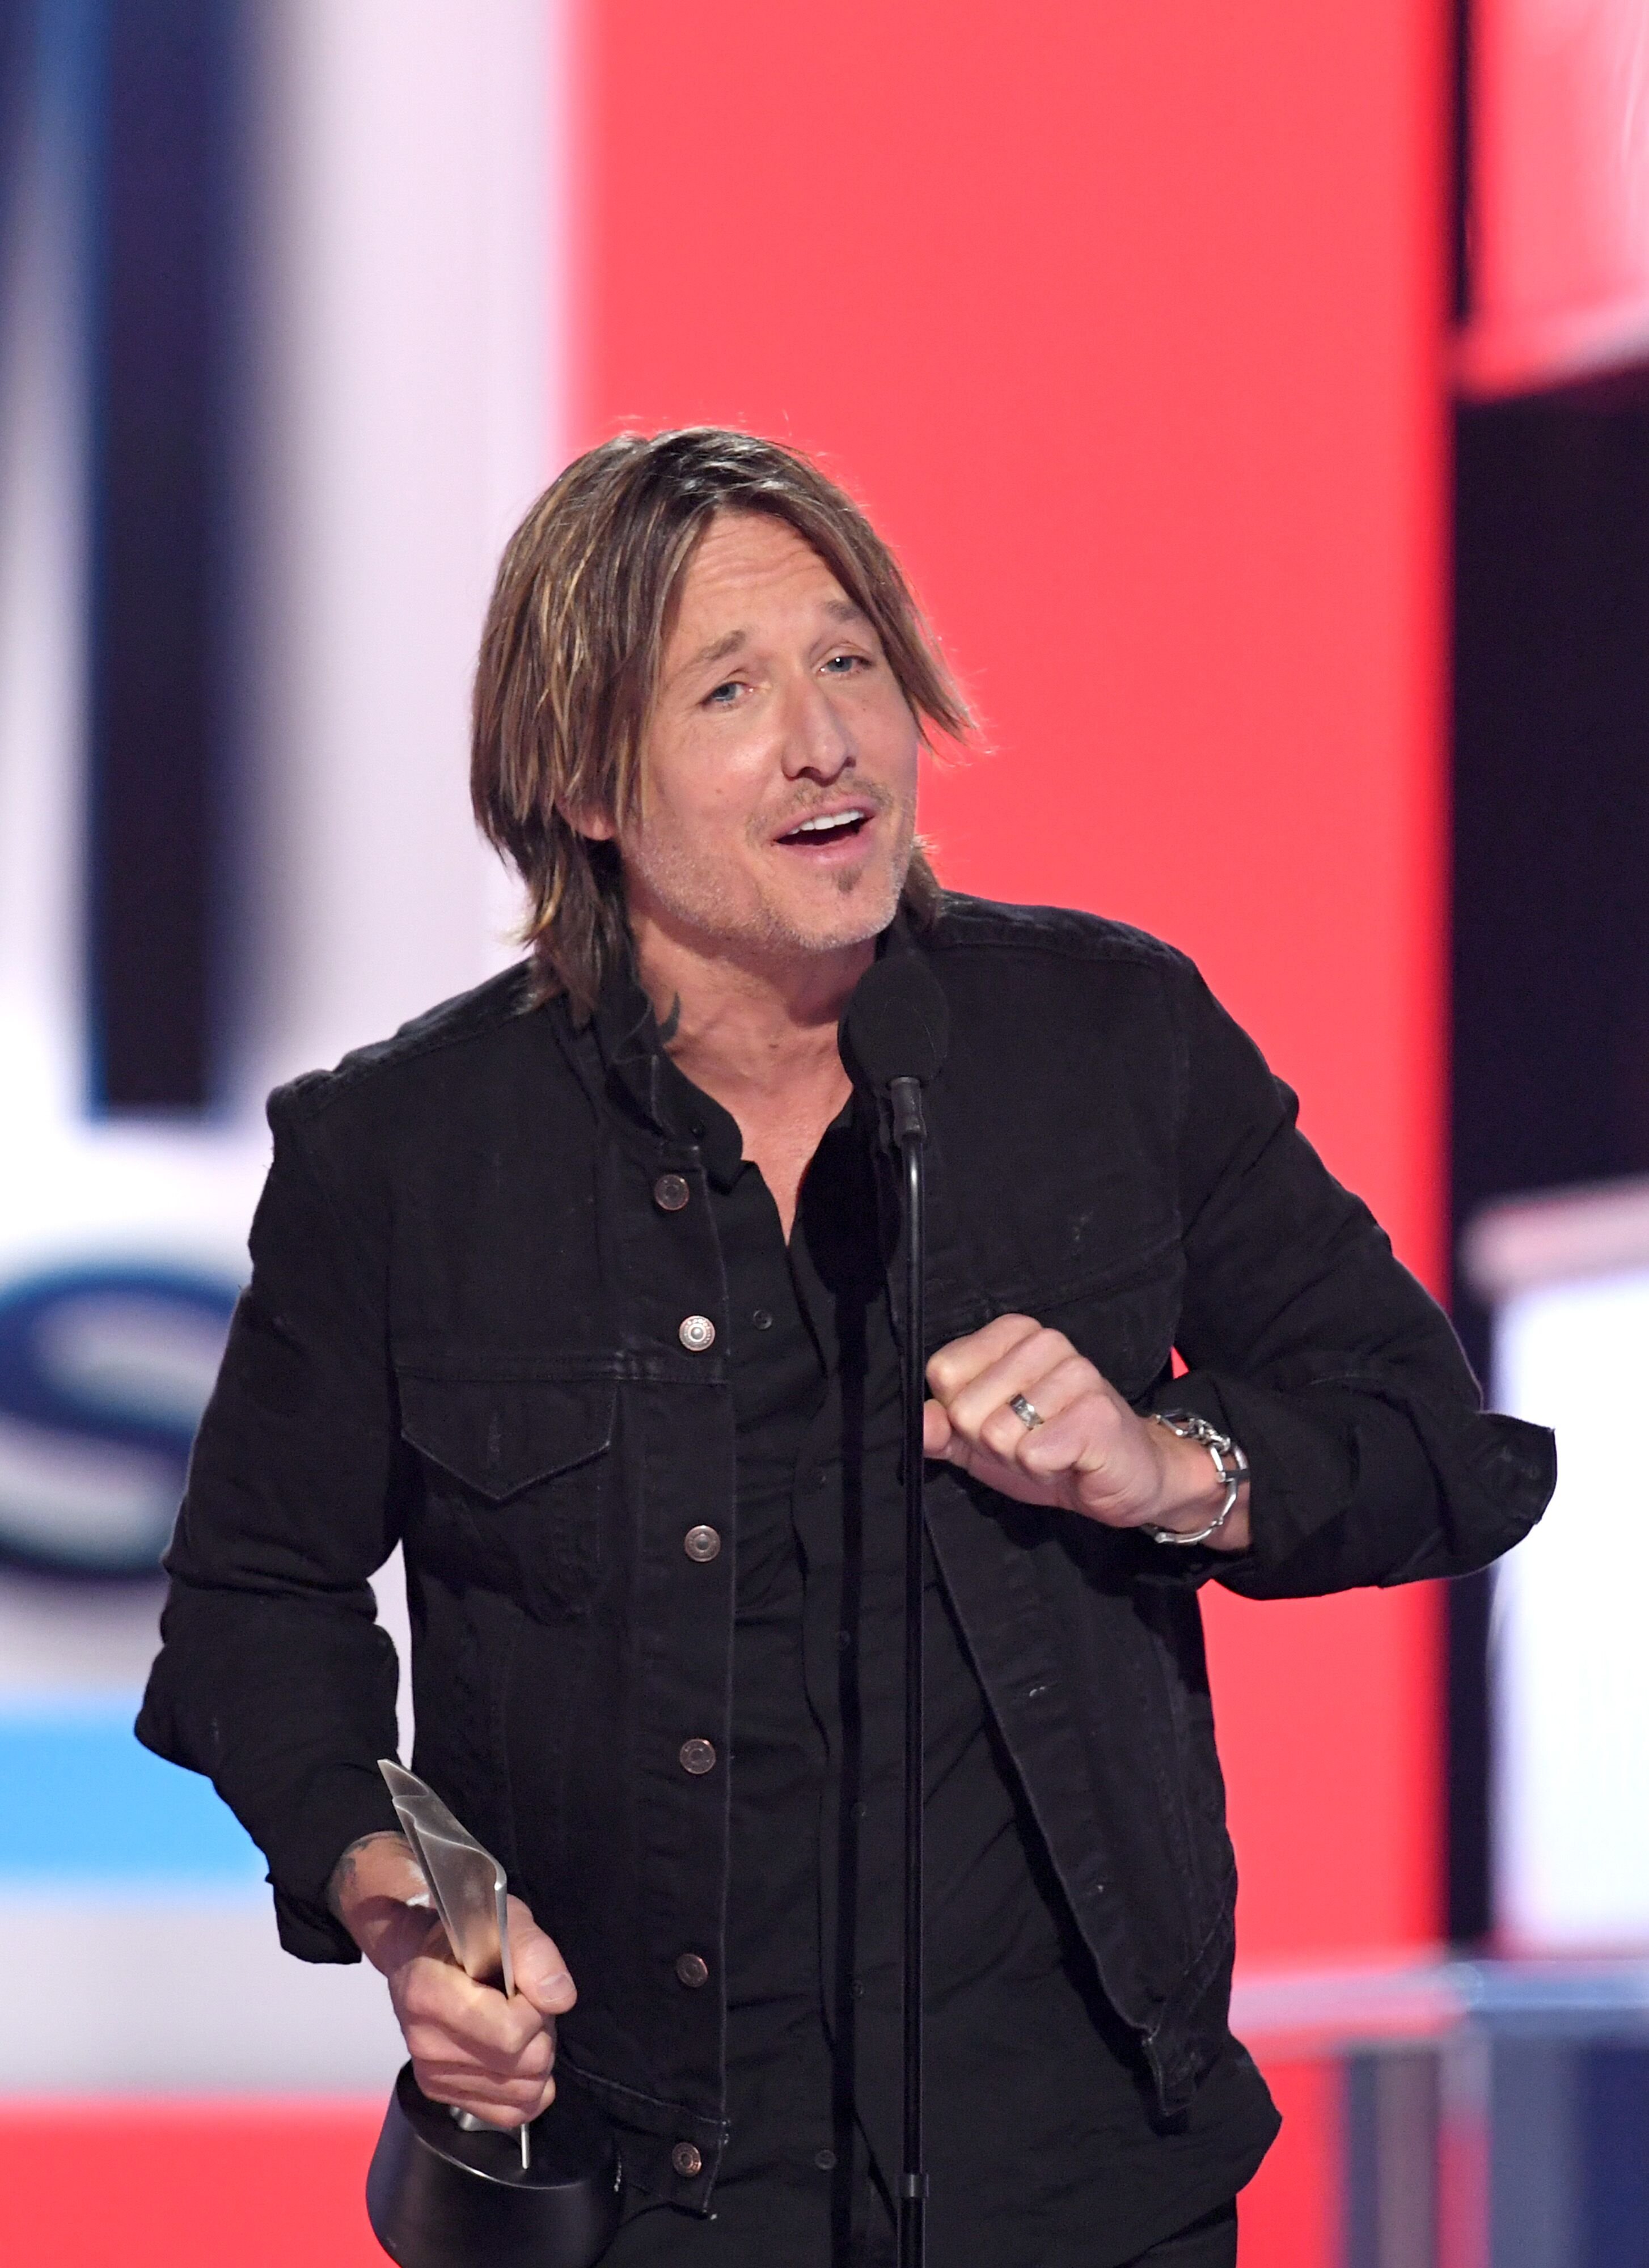 Keith Urban at the 54th Academy Of Country Music Awards on April 07, 2019, in Las Vegas, Nevada Photo Kevin Winter Getty Images